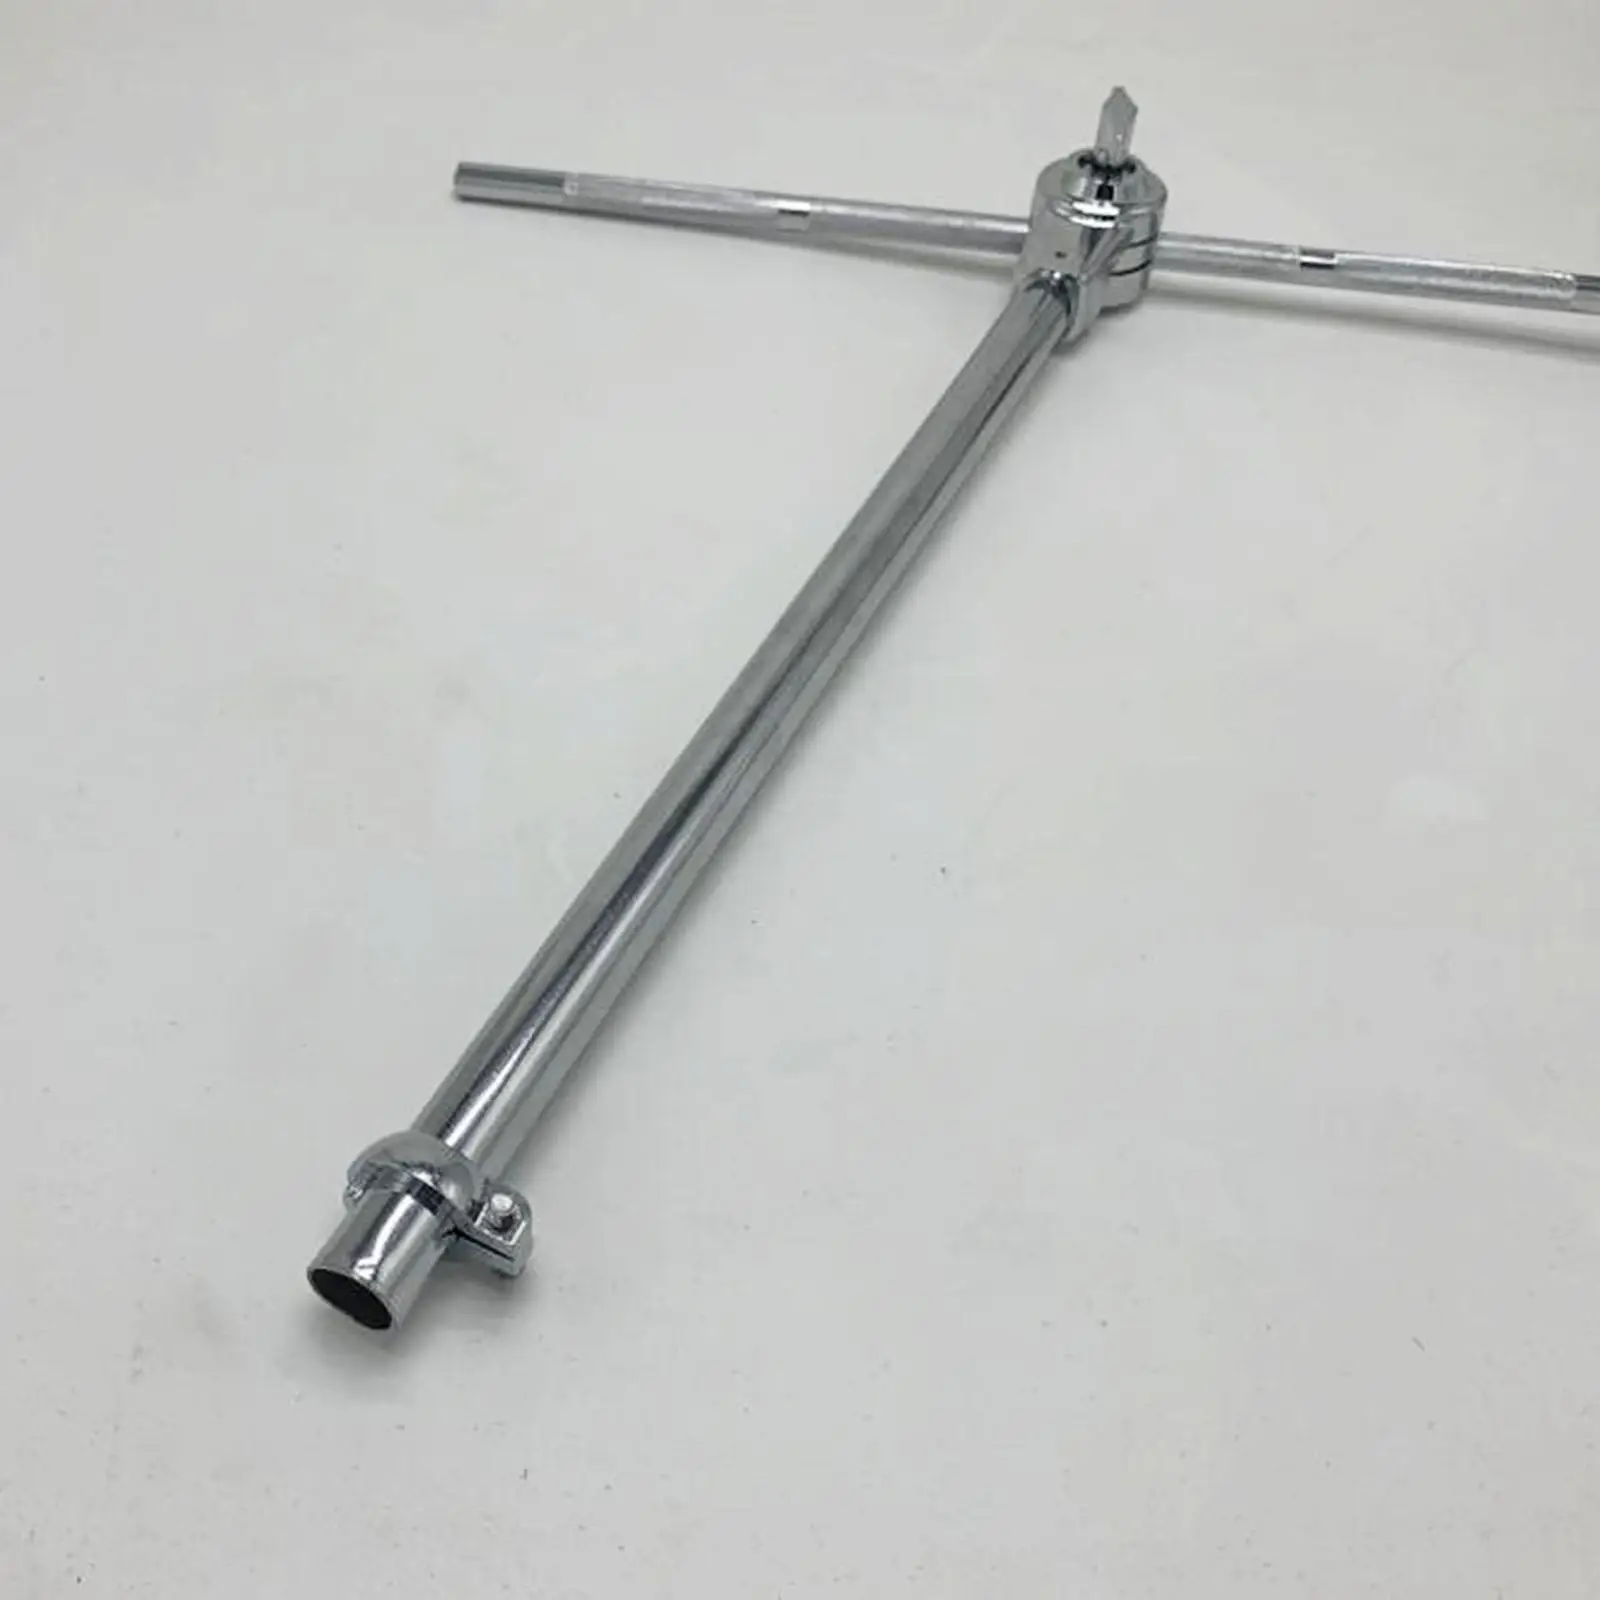 Cymbal Boom Holder Single Locking Cymbal Arm Easily Installation Drum Parts Percussion Accessories Sturdy Clamp Mount Attachment